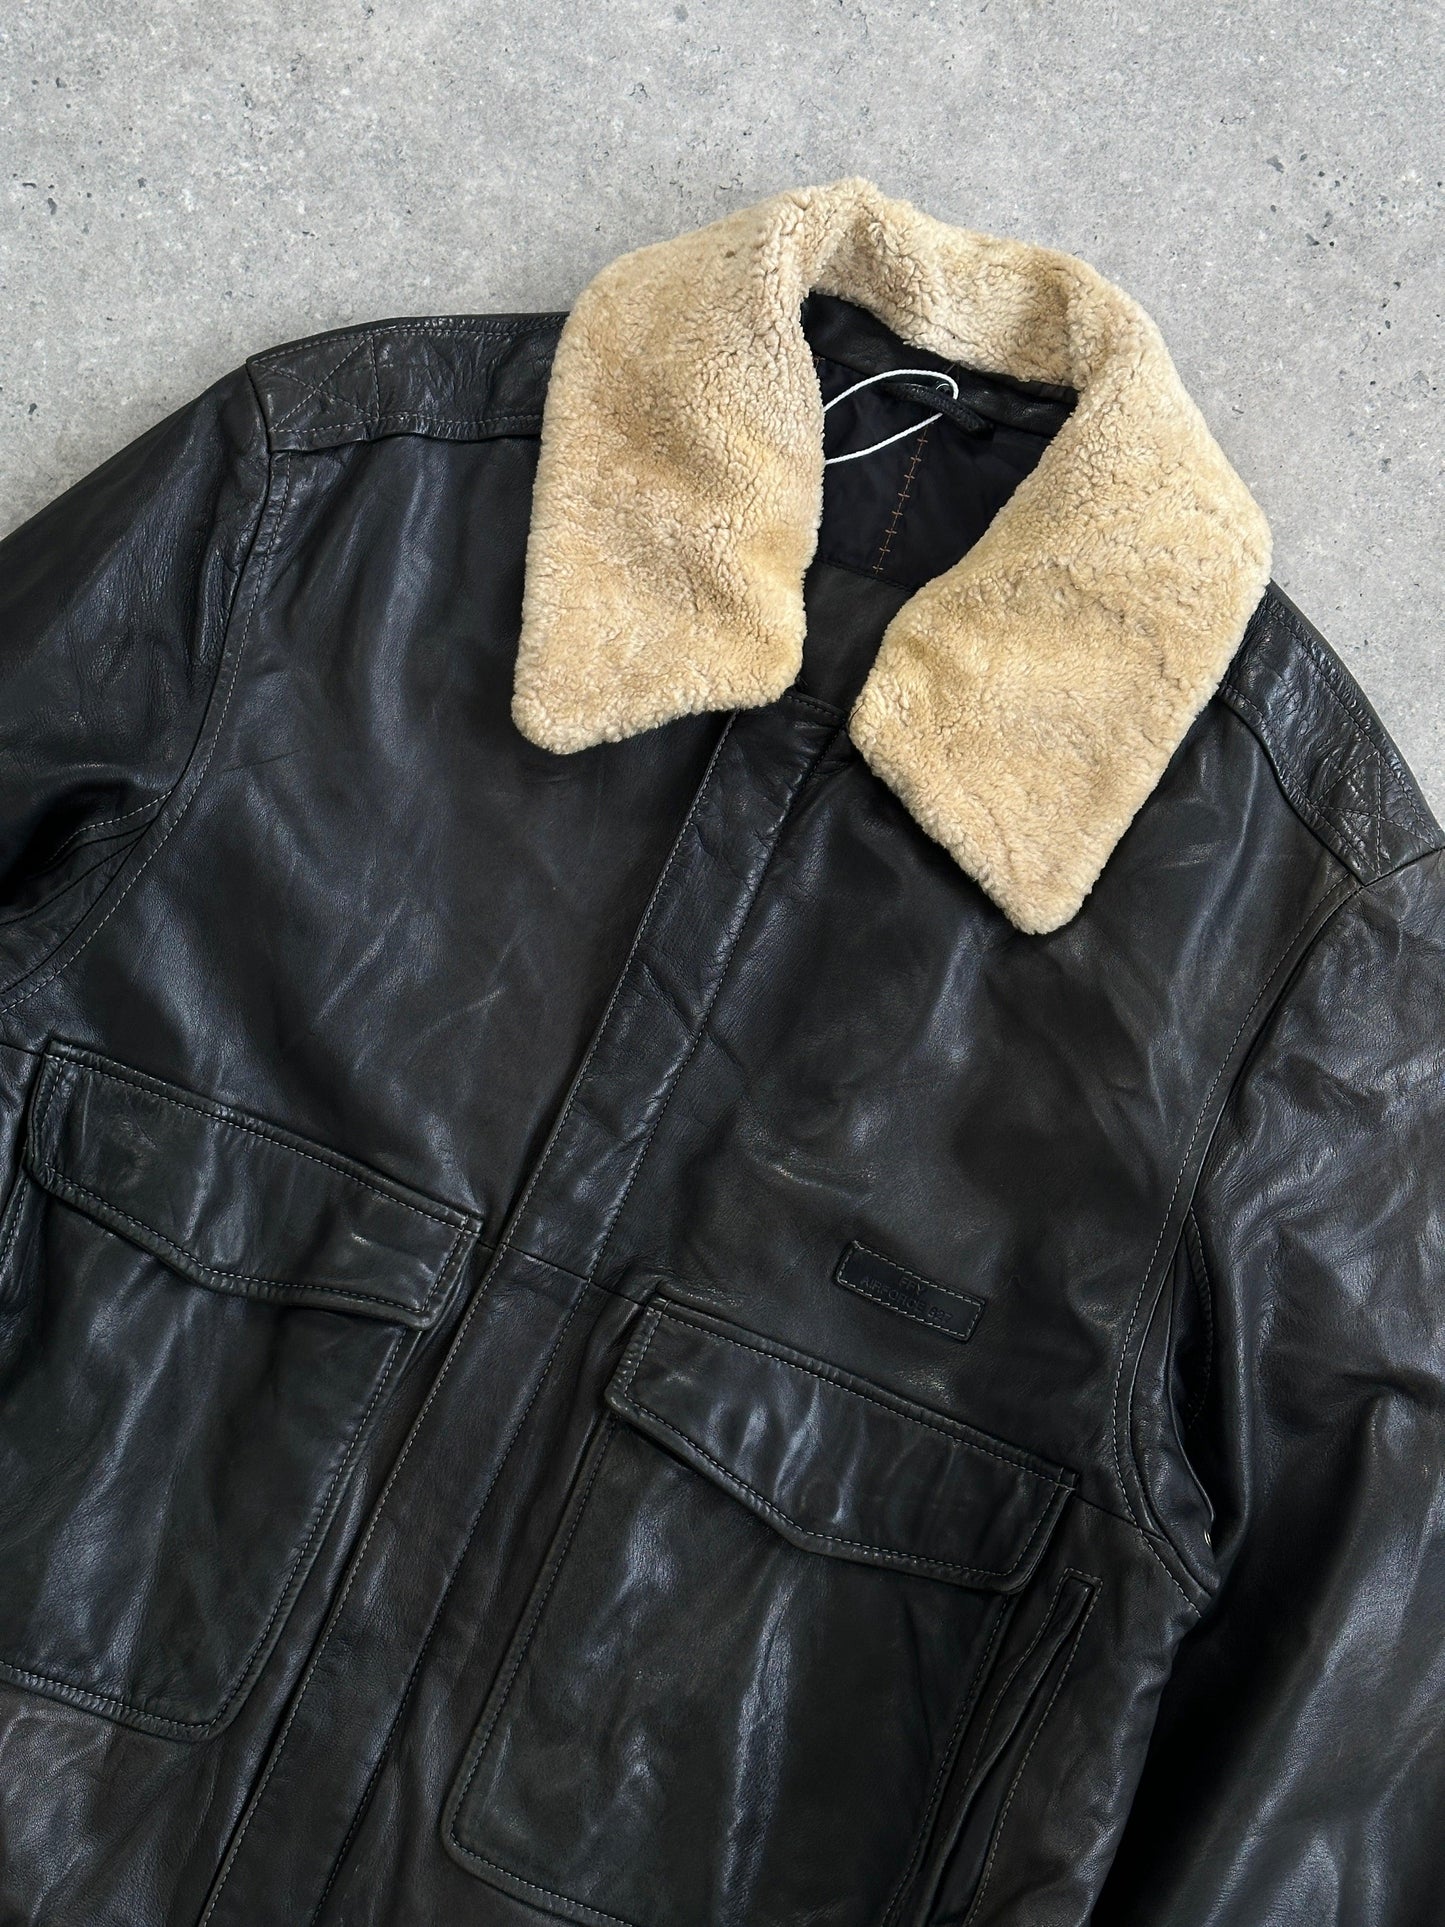 Vintage Removable Fur Collar Aviator Leather Bomber Jacket - L/XL - Known Source